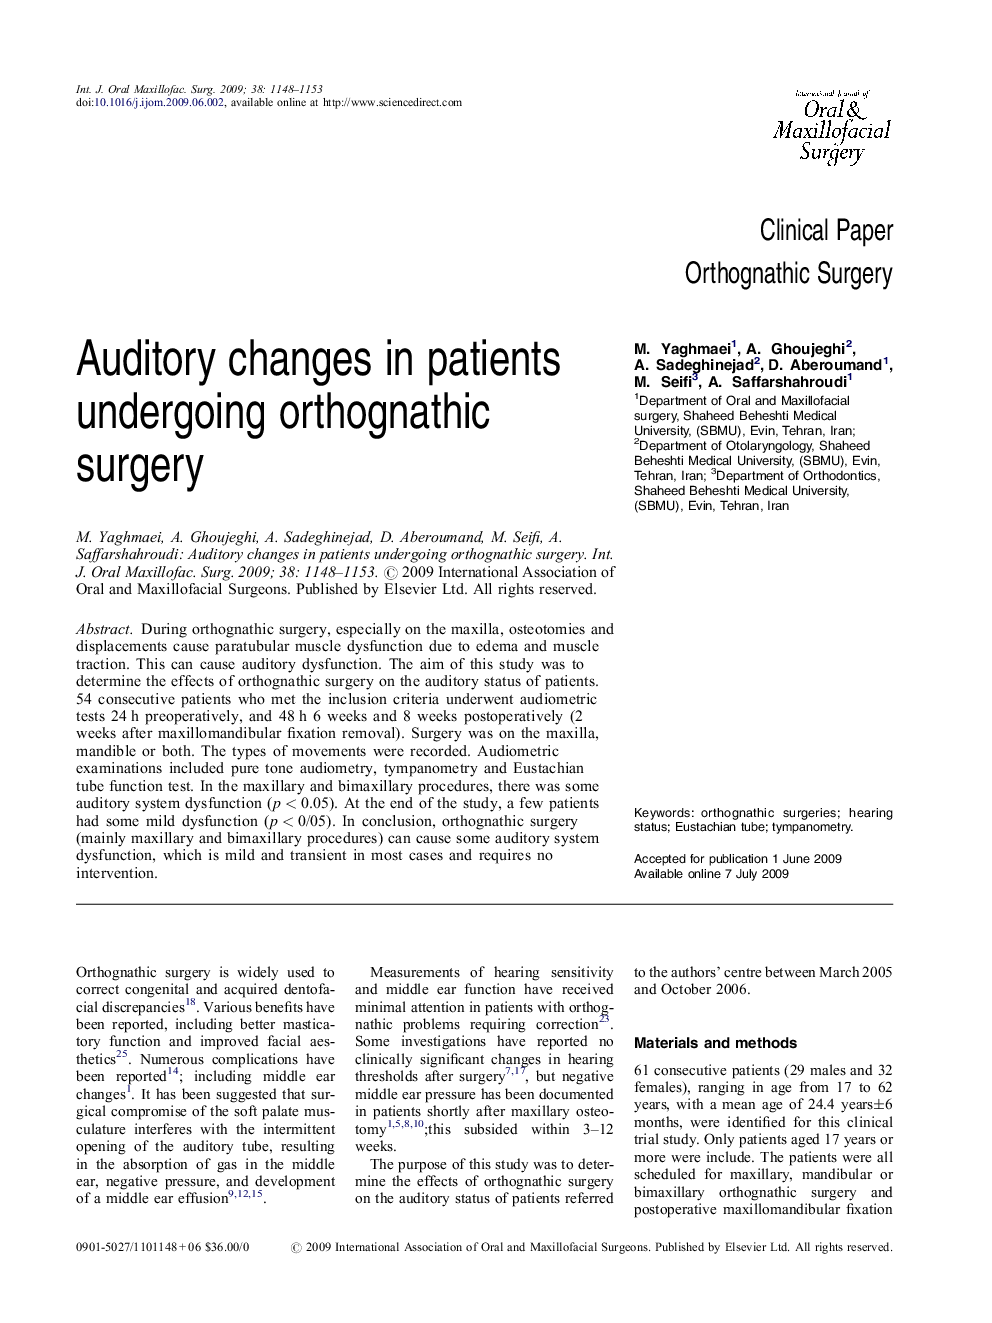 Auditory changes in patients undergoing orthognathic surgery